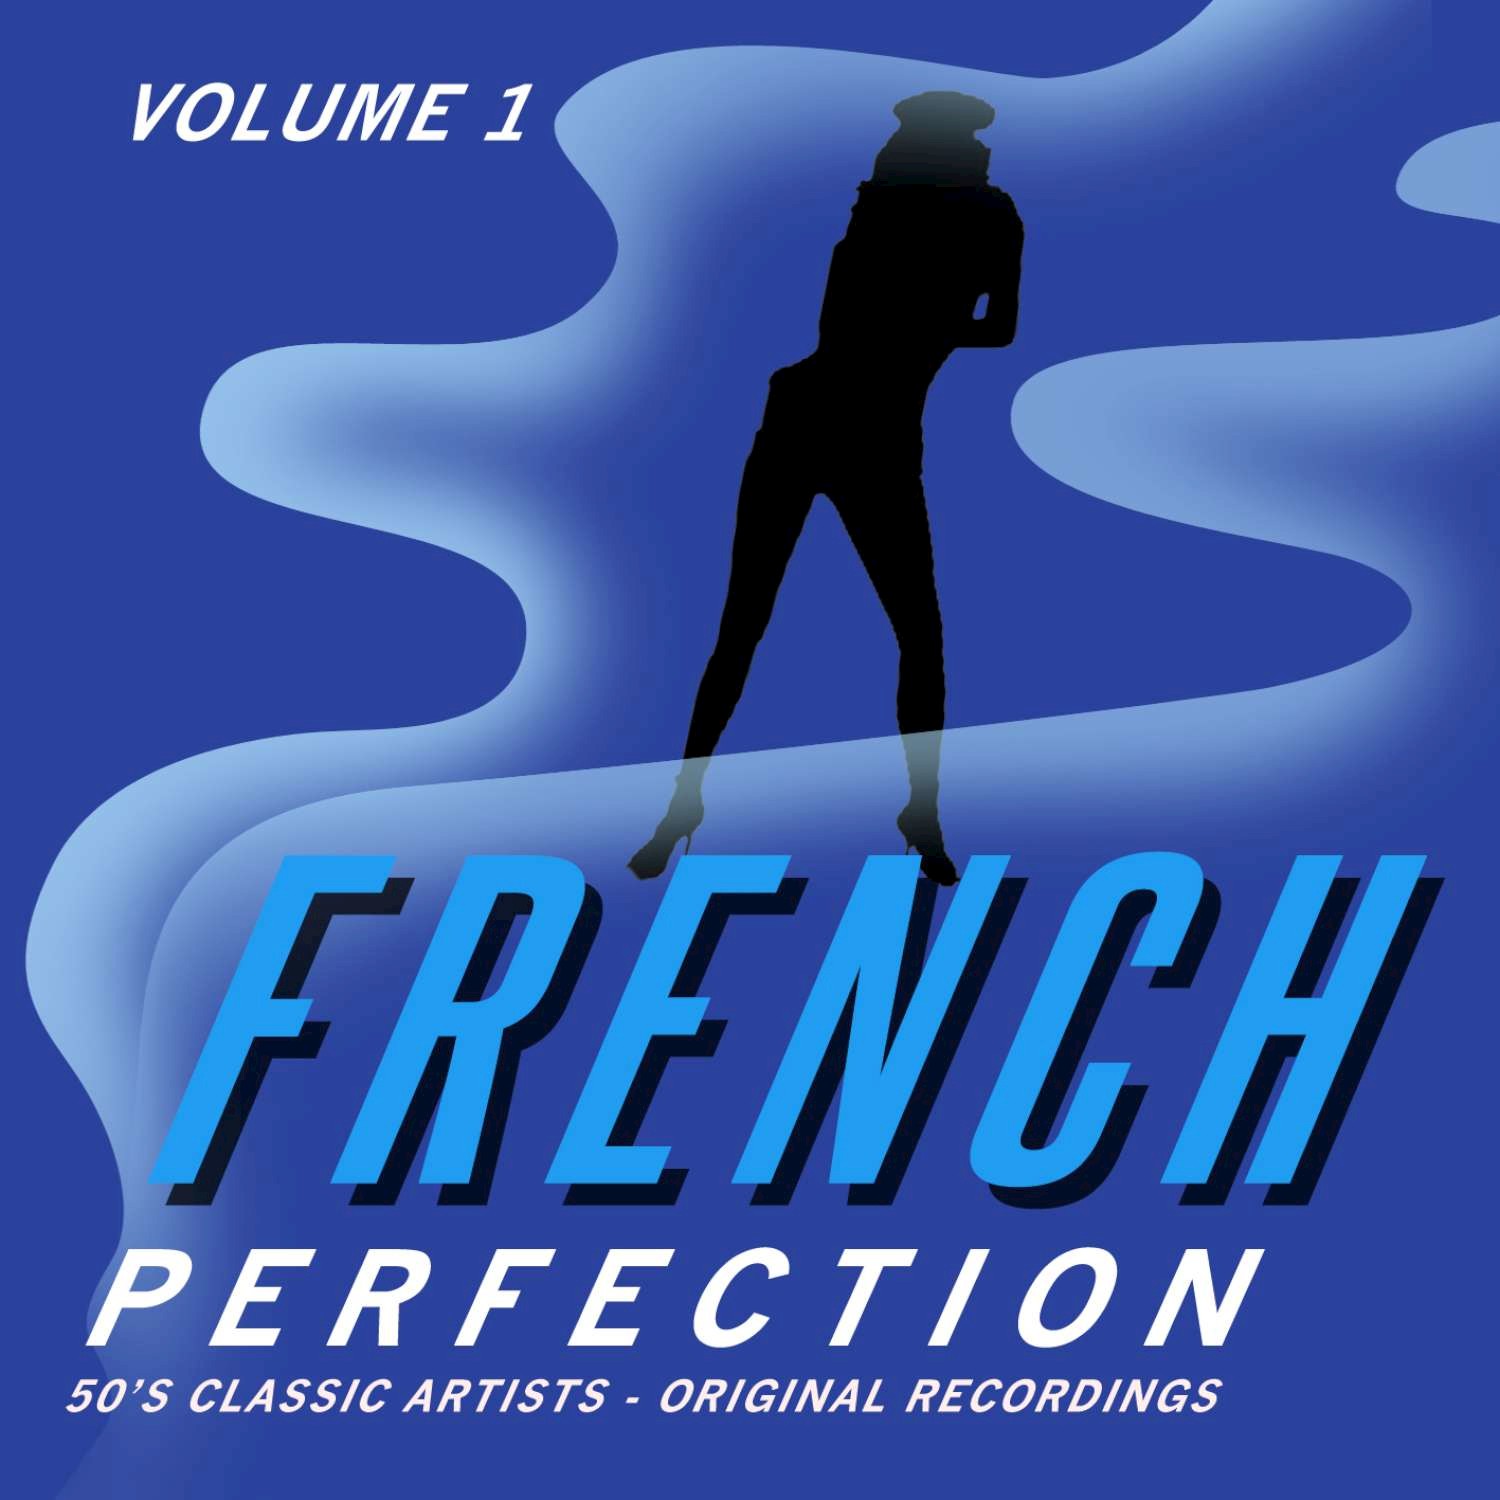 French Perfection, Vol. 1 - 50's Classic Artists (Original Recordings)